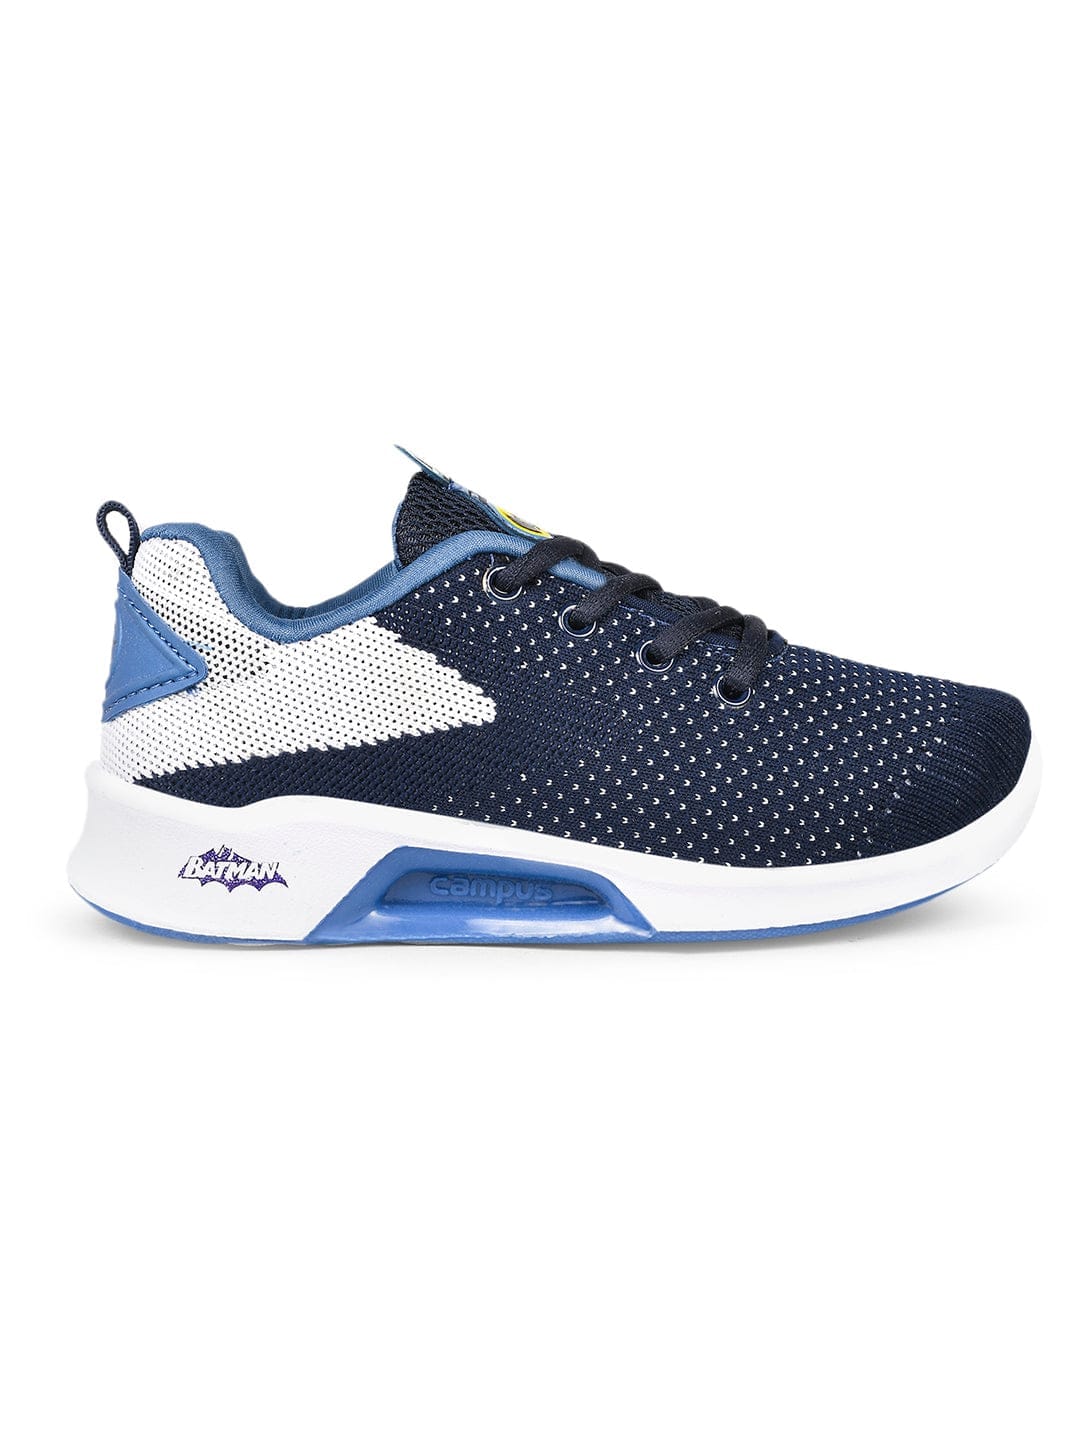 CAMPUS FIRST Running Shoes For Men  Buy CAMPUS FIRST Running Shoes For Men  Online at Best Price  Shop Online for Footwears in India  Flipkartcom